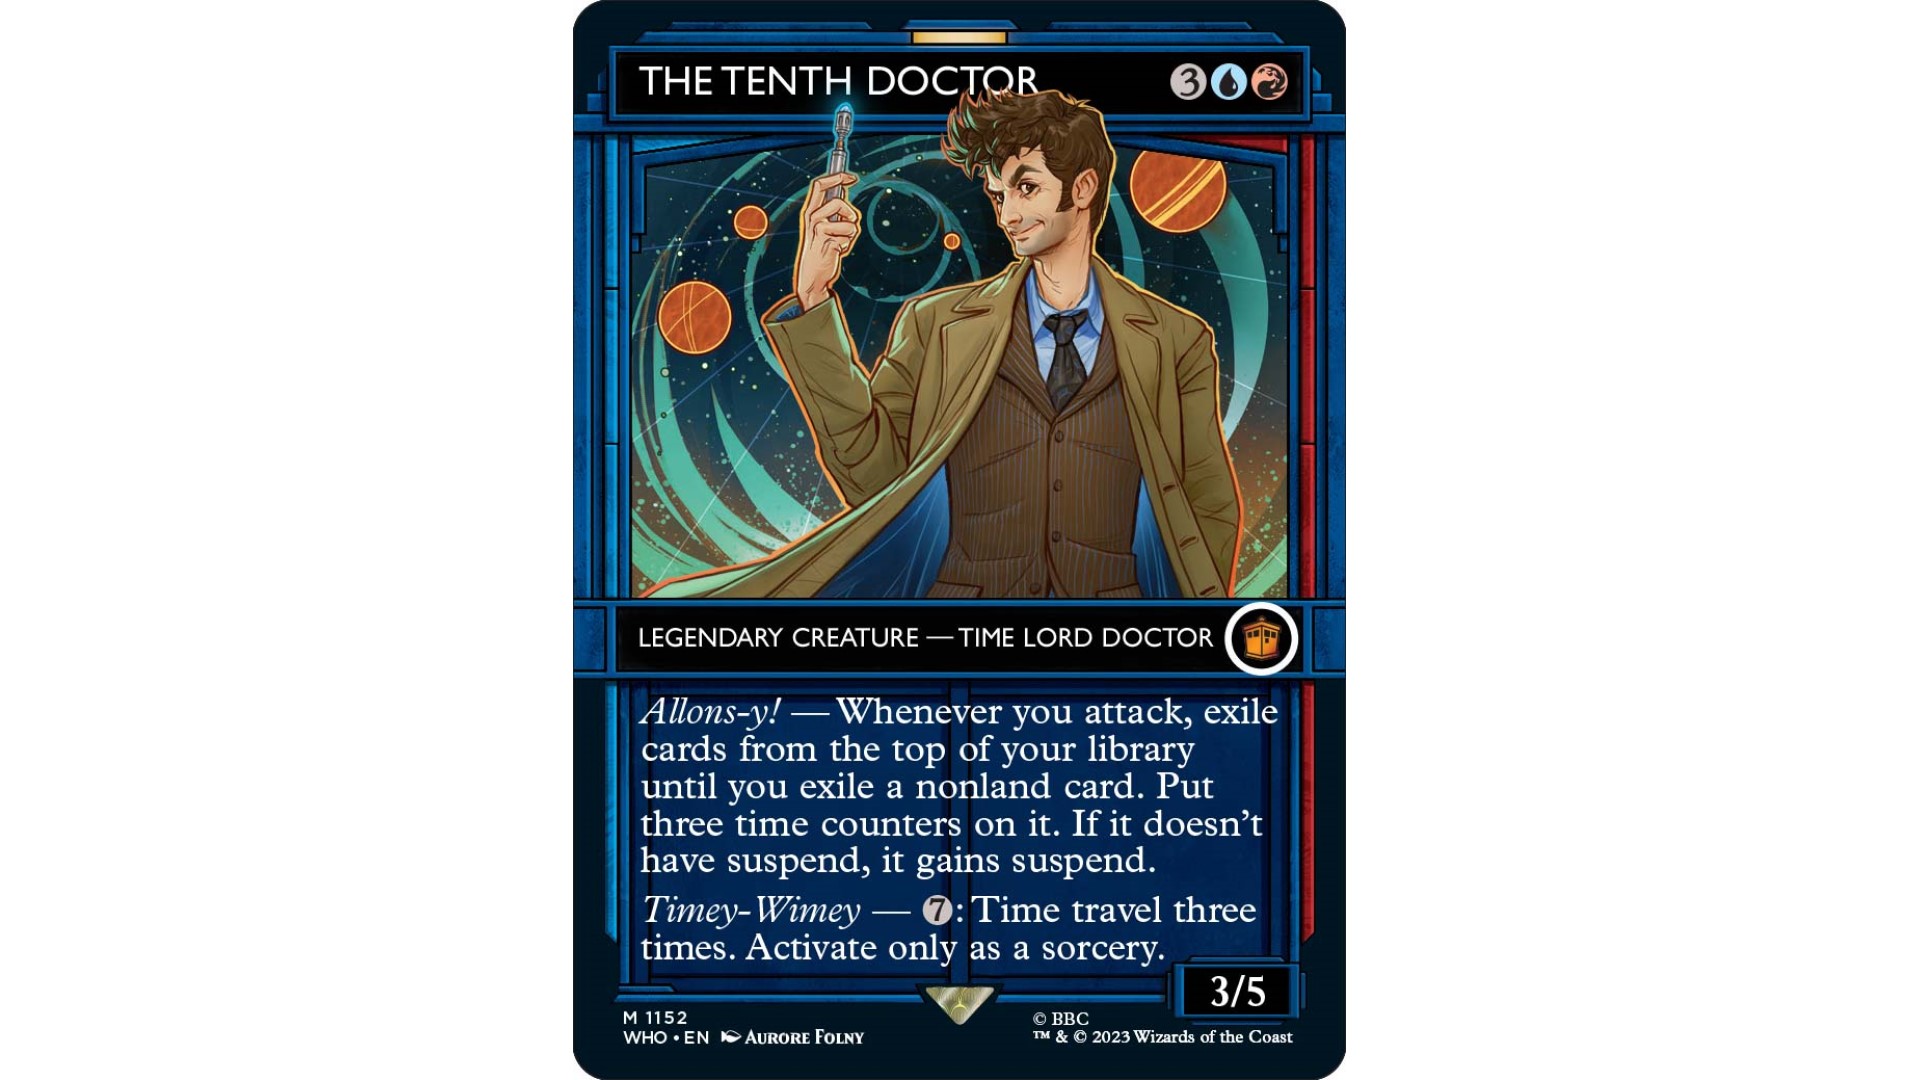 Here's every legendary Doctor card from Magic: The Gathering's